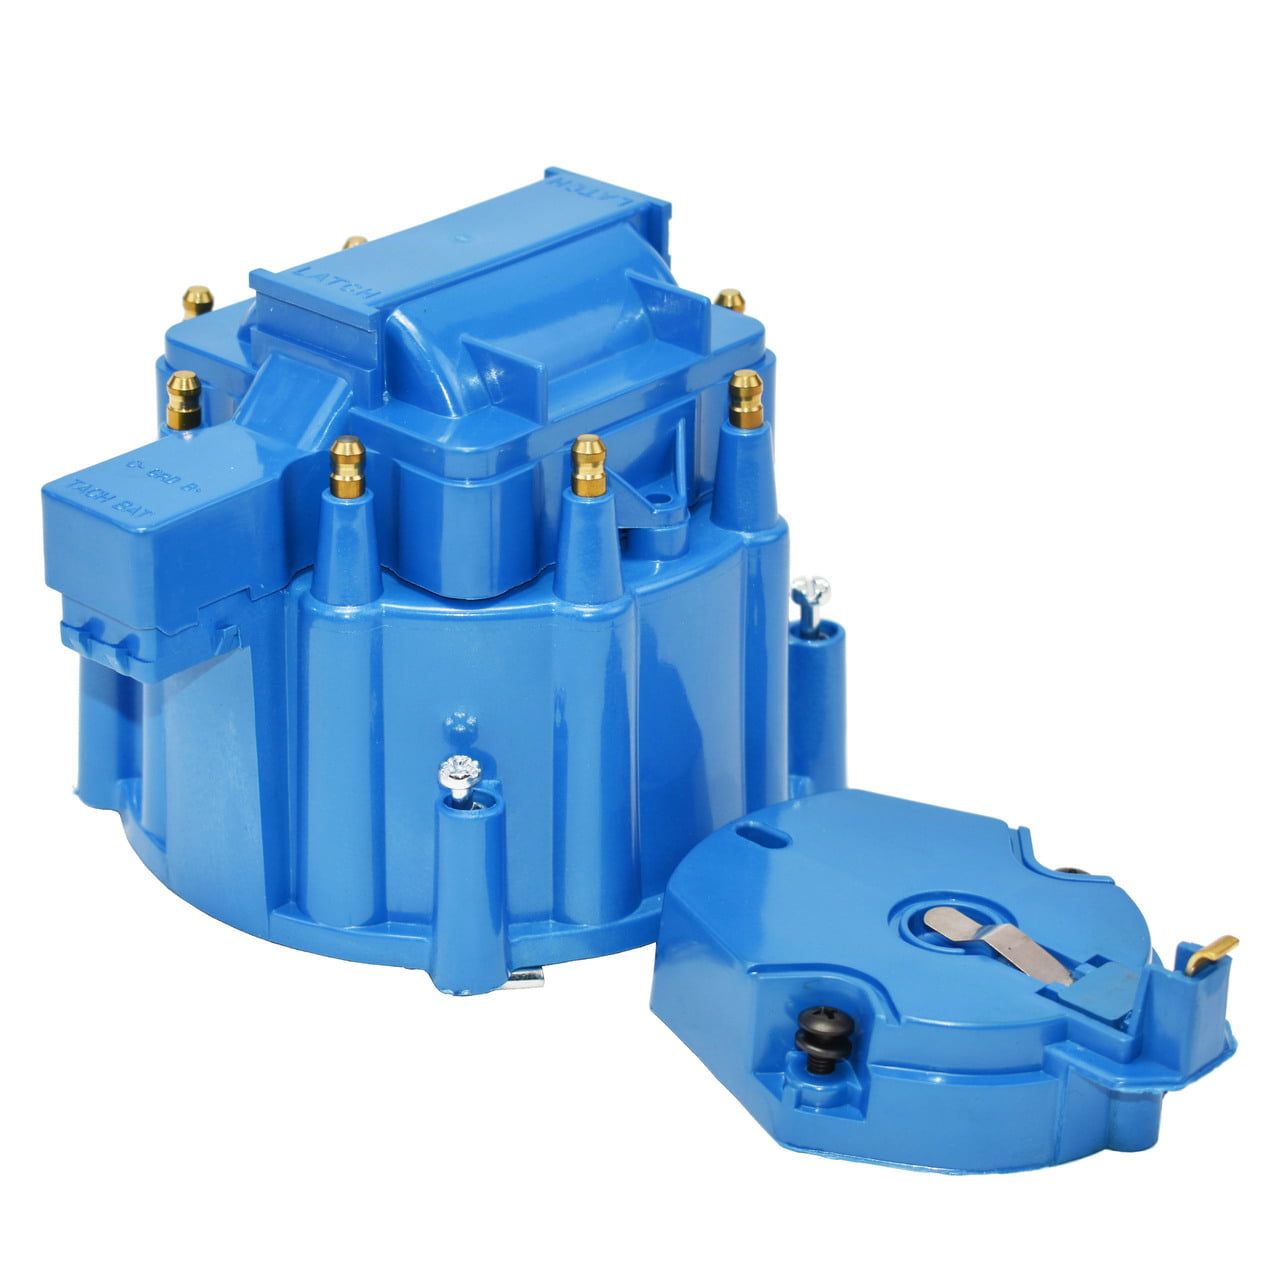 Coil Cover /& Rotor Kit and 65,000 Volt Coil GM-CHEVY BLUE HEI Distributor Cap